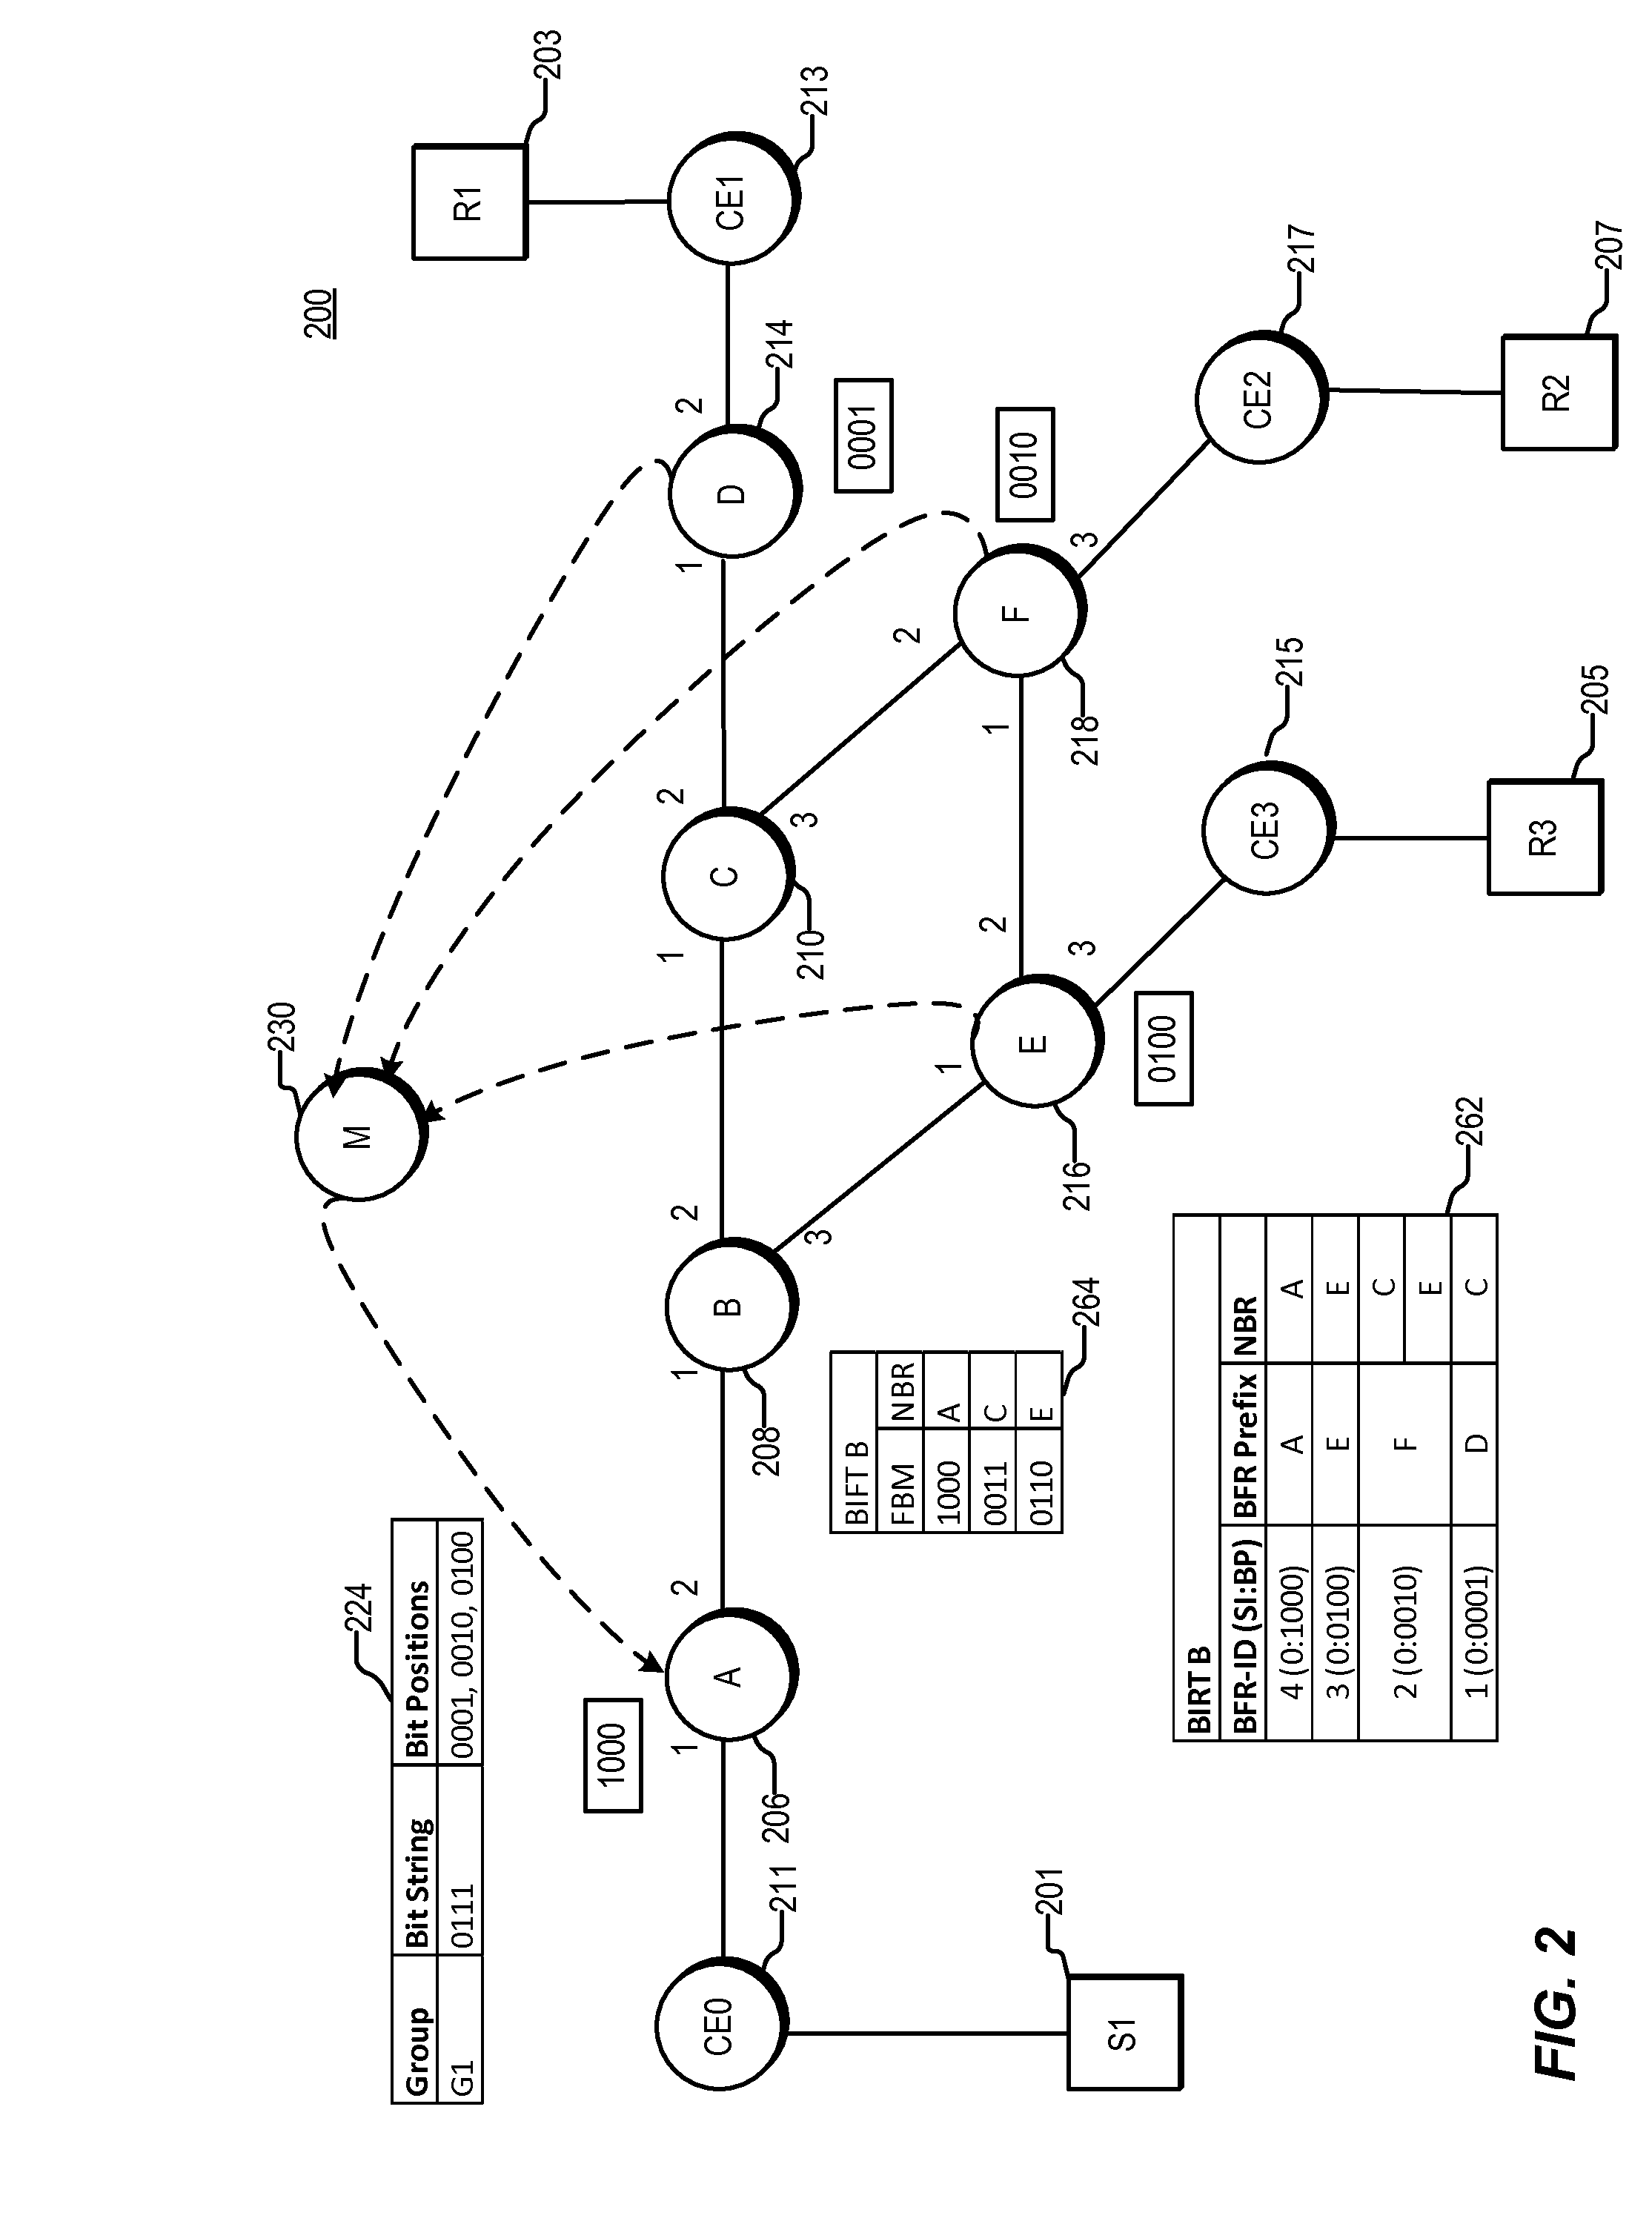 Equal Cost Multi-path With Bit Indexed Explicit Replication